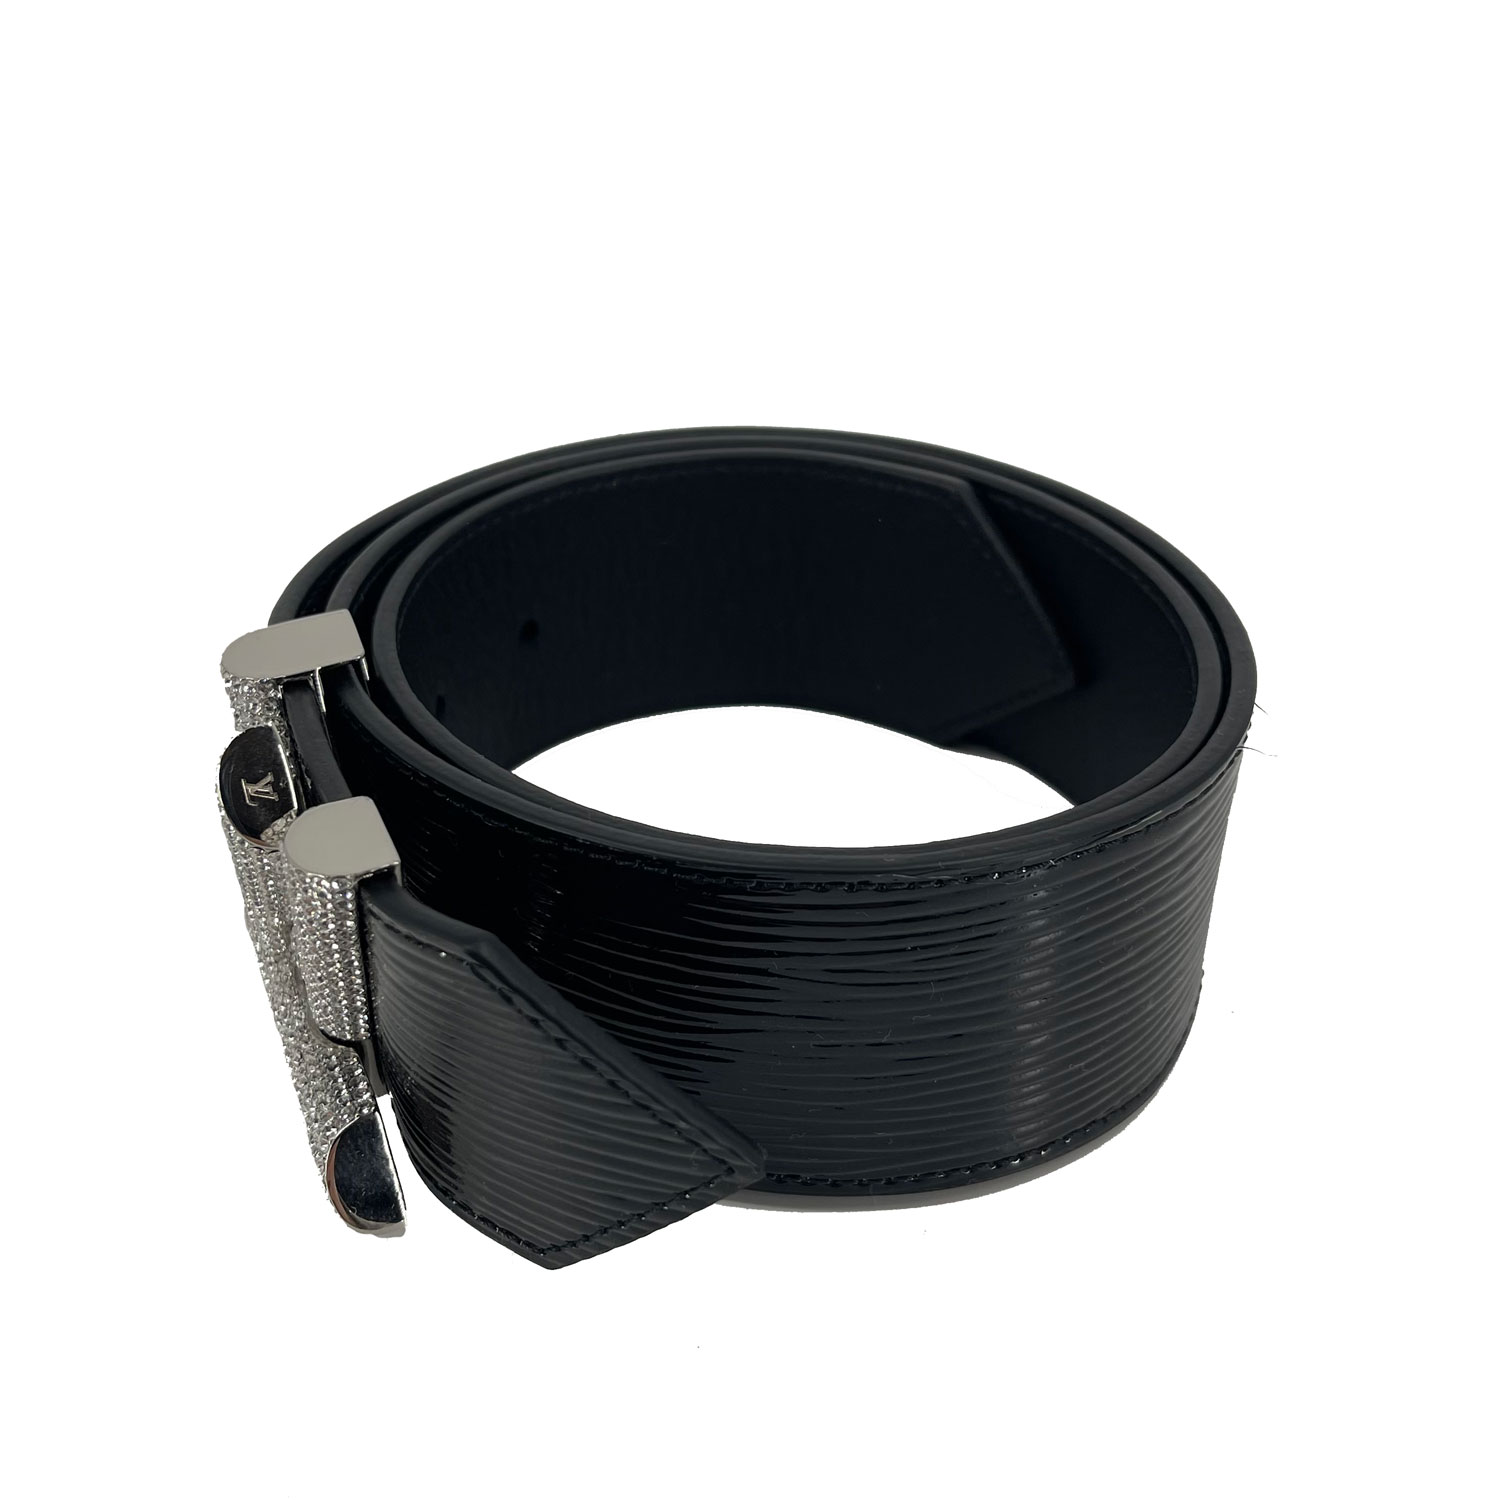 black and white louis vuittons belt